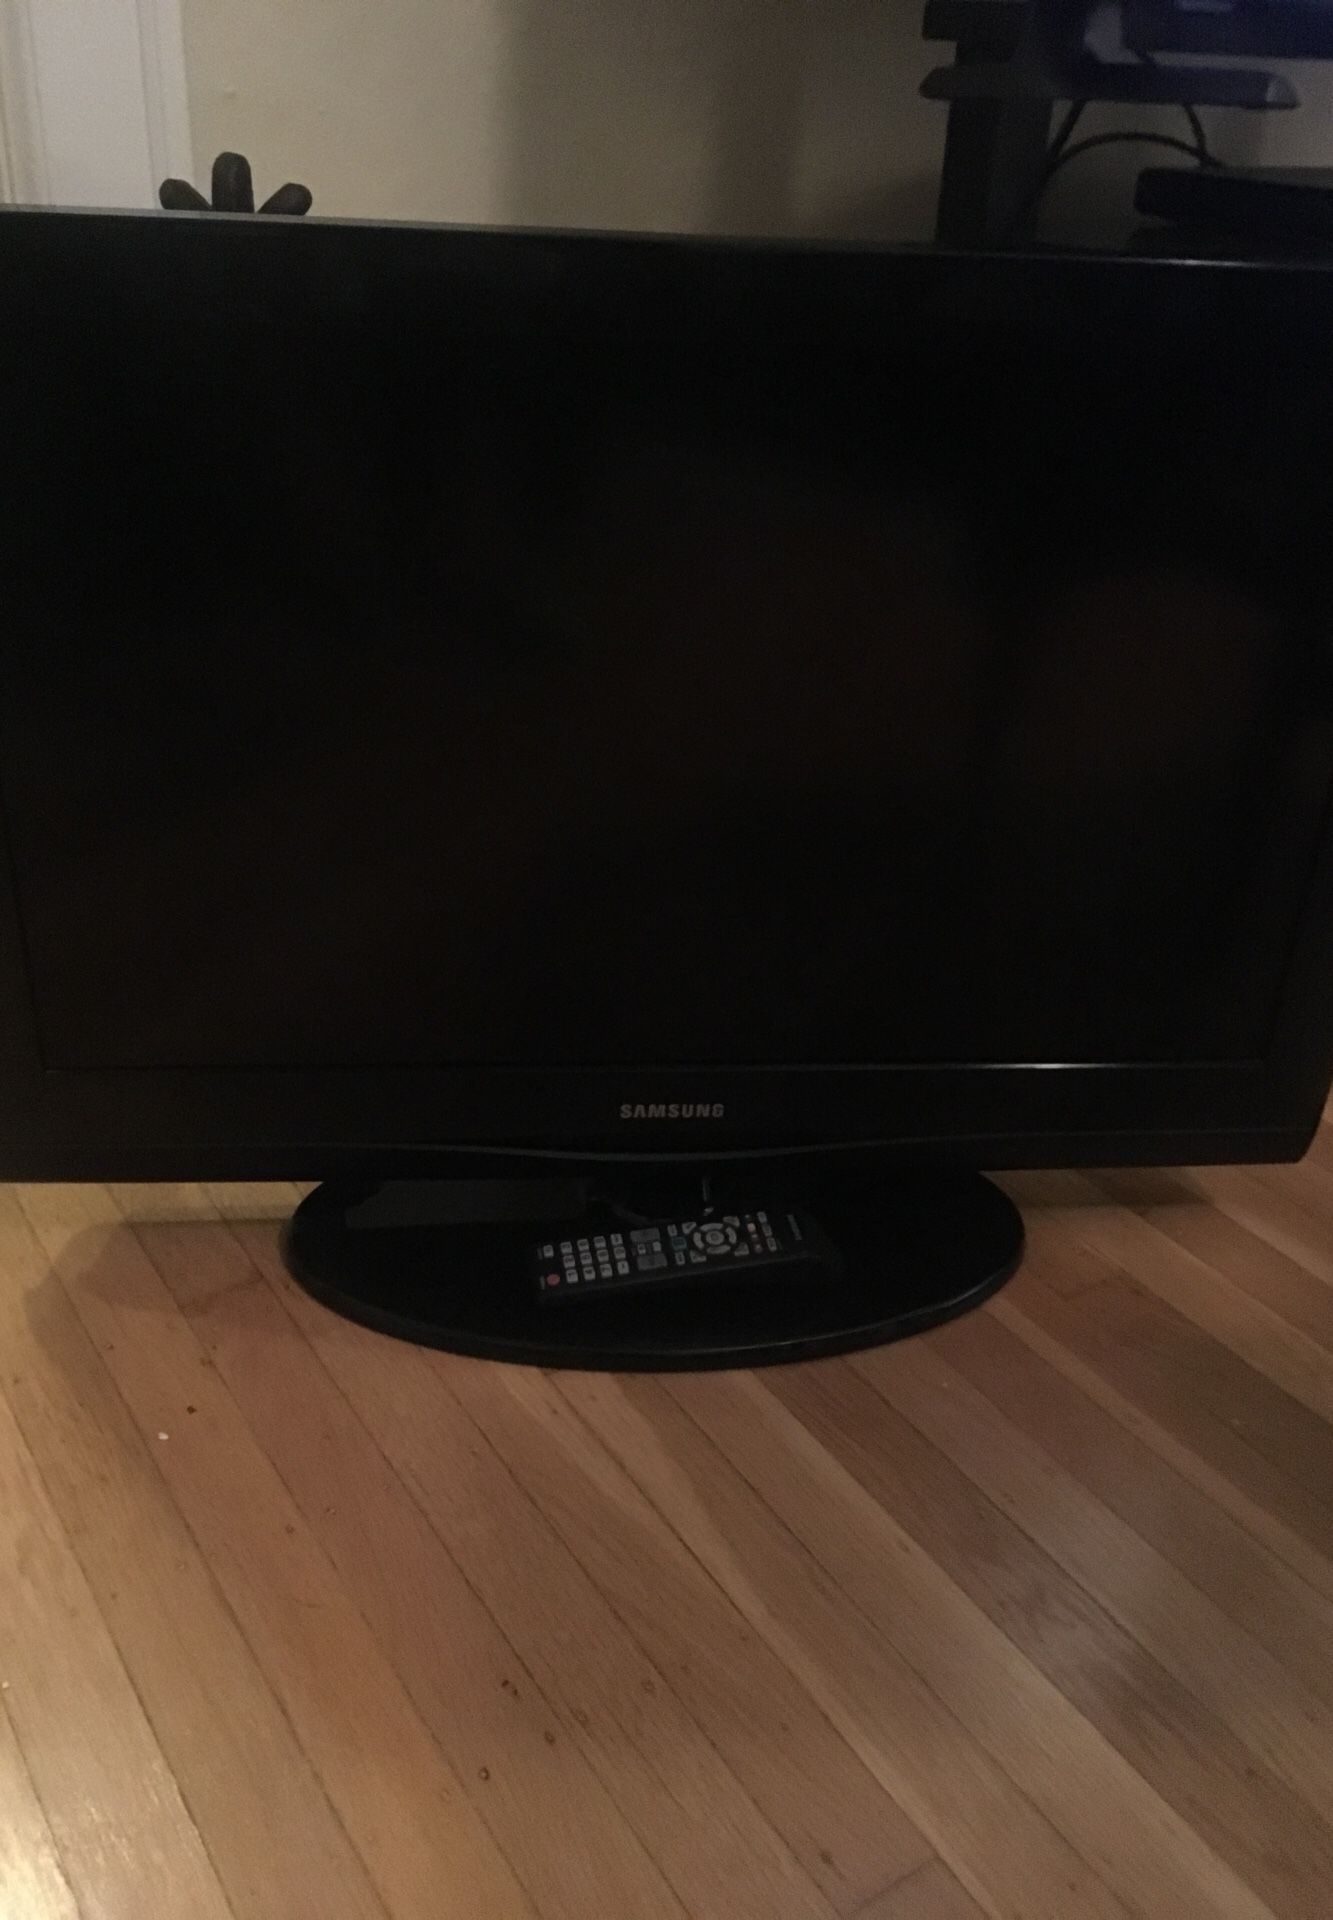 Samsung 32” TV! Great condition!